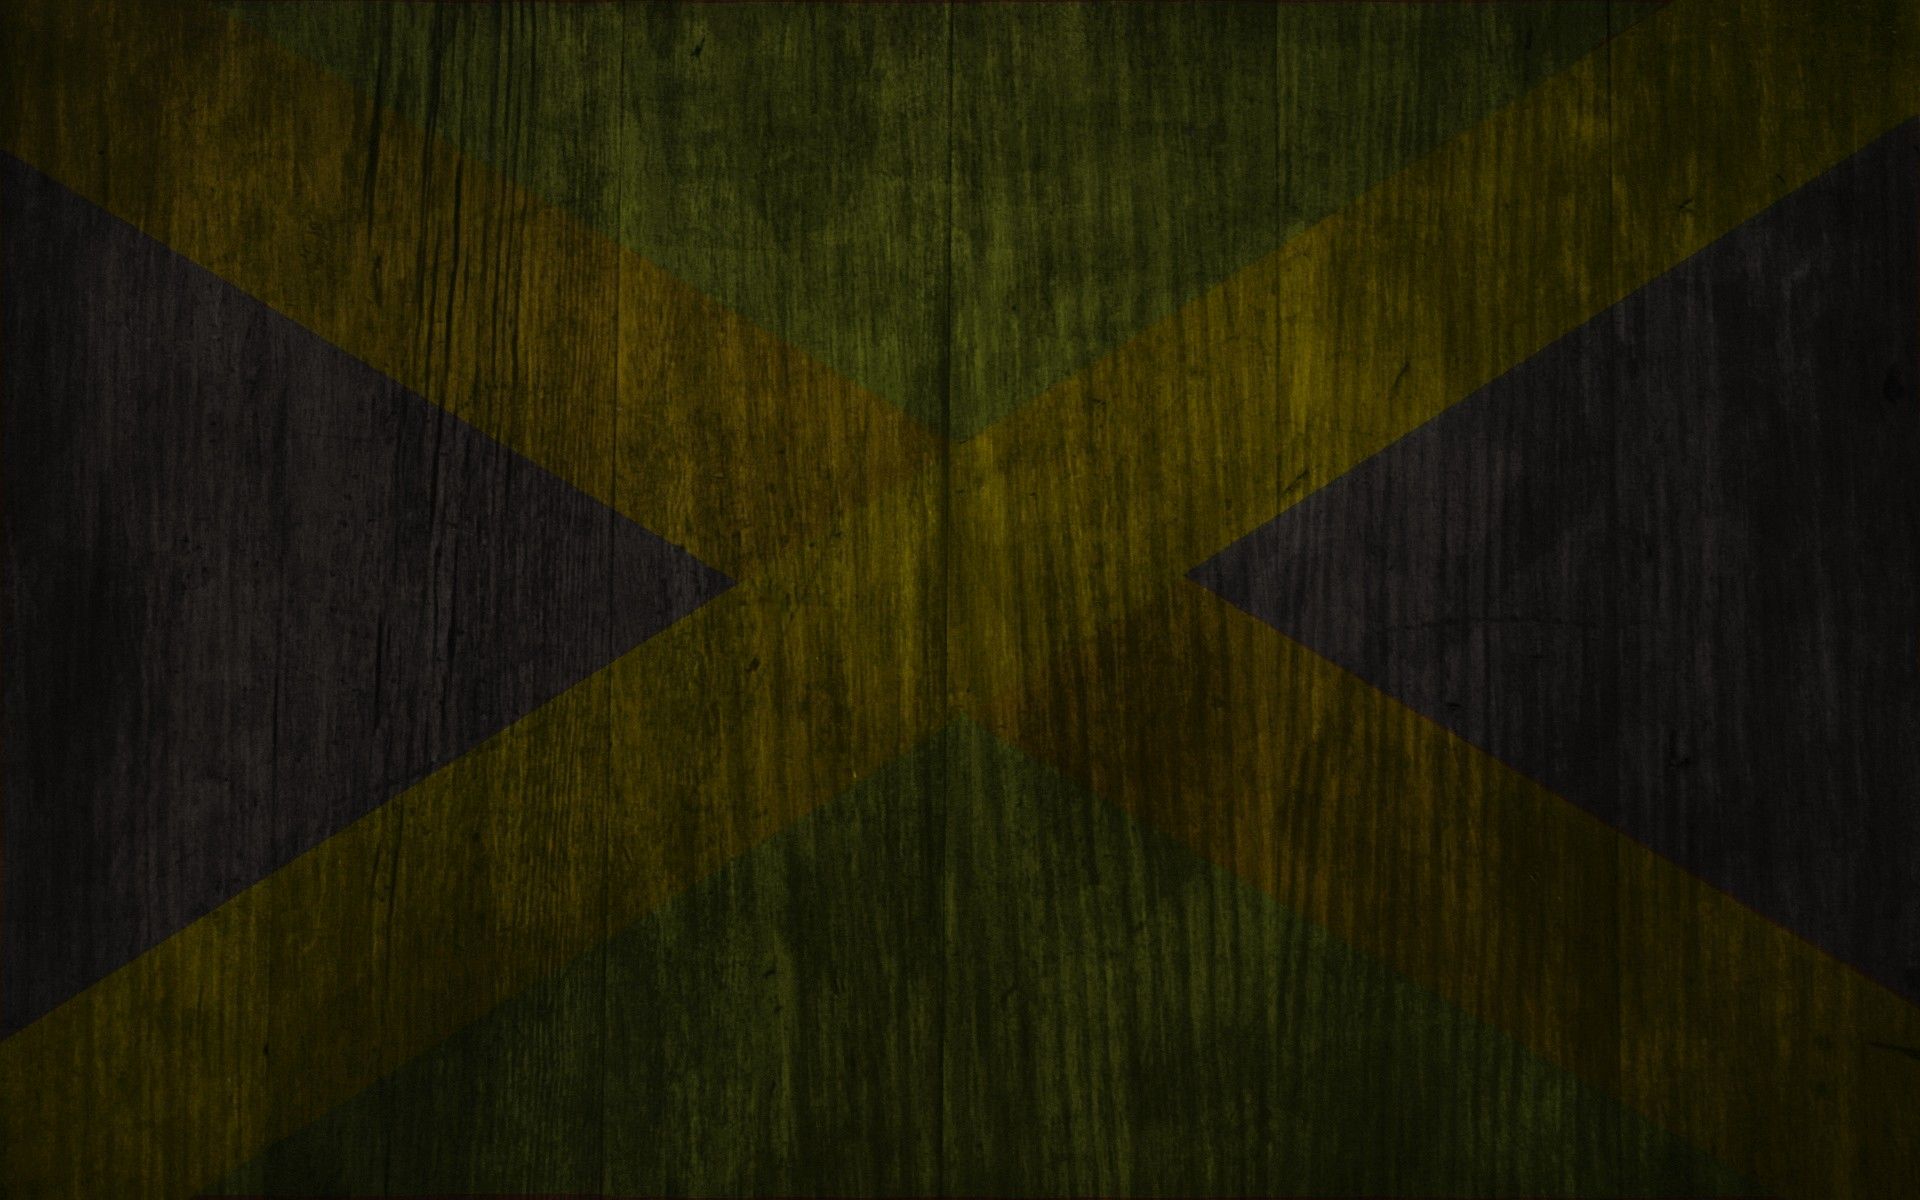 EBW91: Jamaica Flag Wallpaper in Best Resolutions, HD Quality